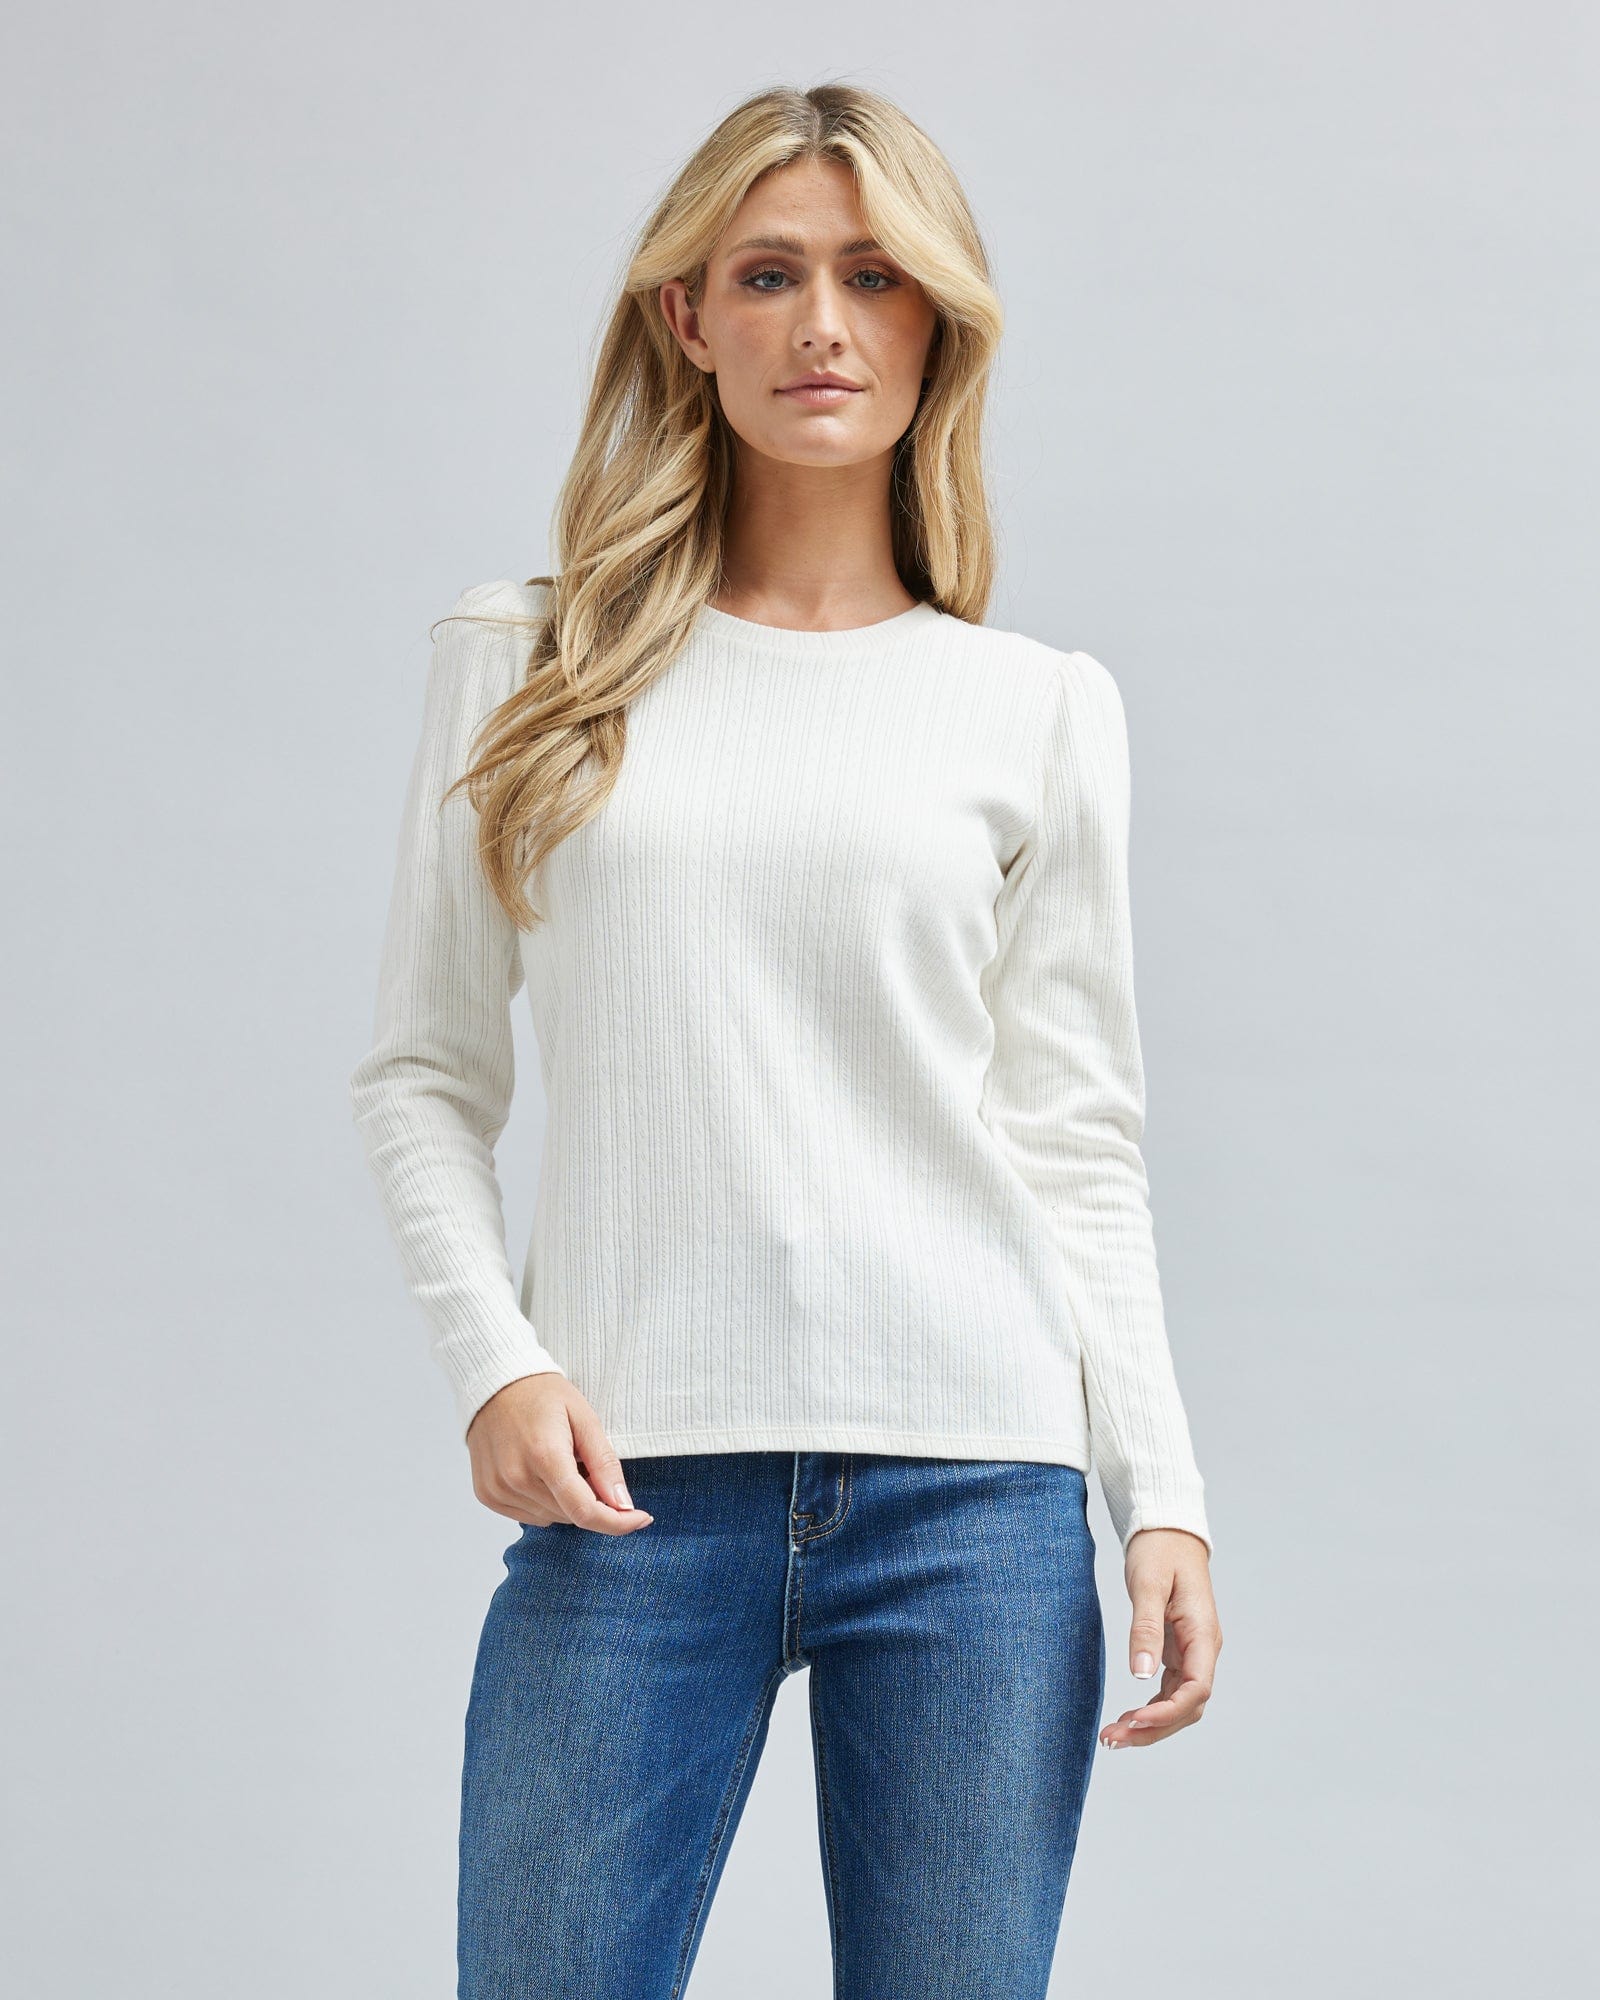 Woman in a long sleeve, ribbed, white t-shirt